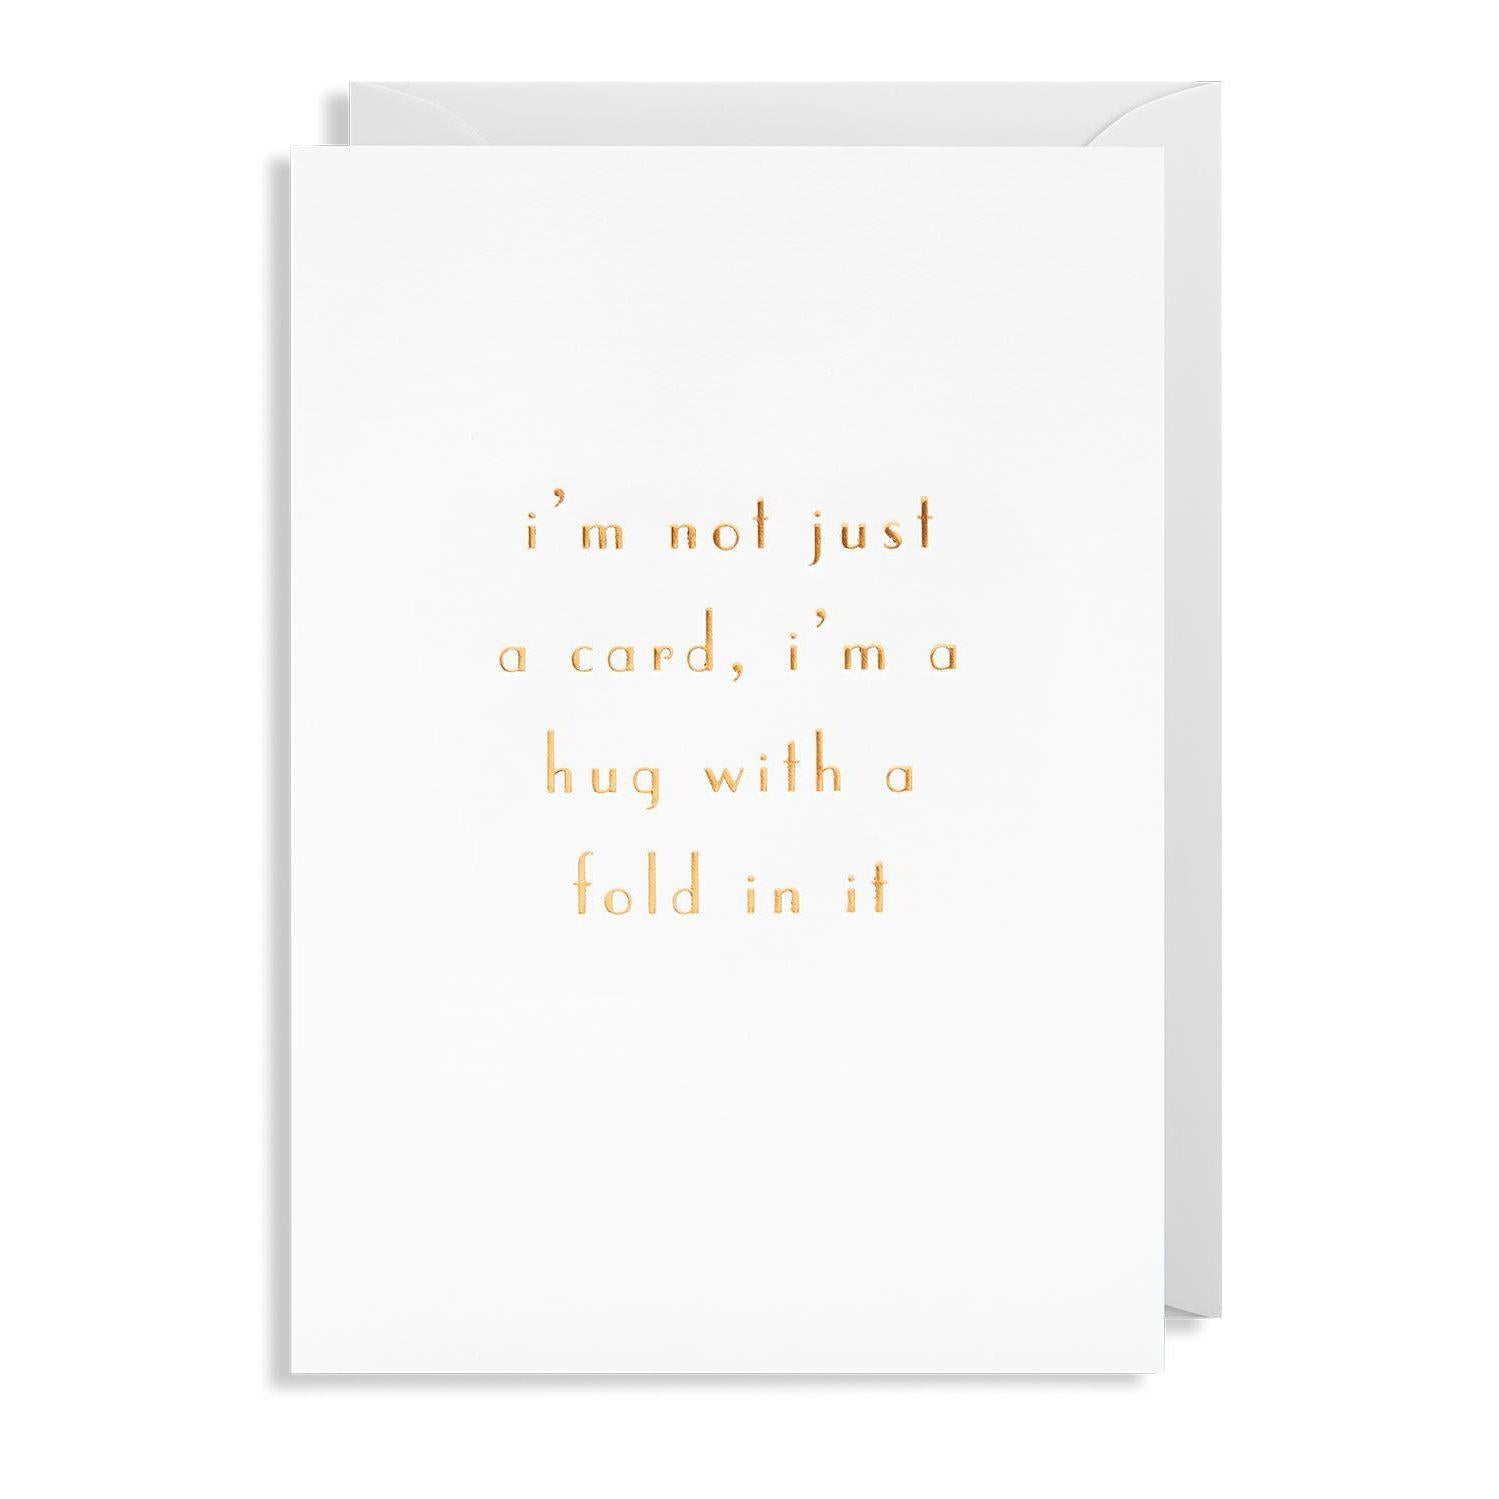 Postco "I'm A Hug With A Fold In It" Greeting Card-Breda's Gift Shop